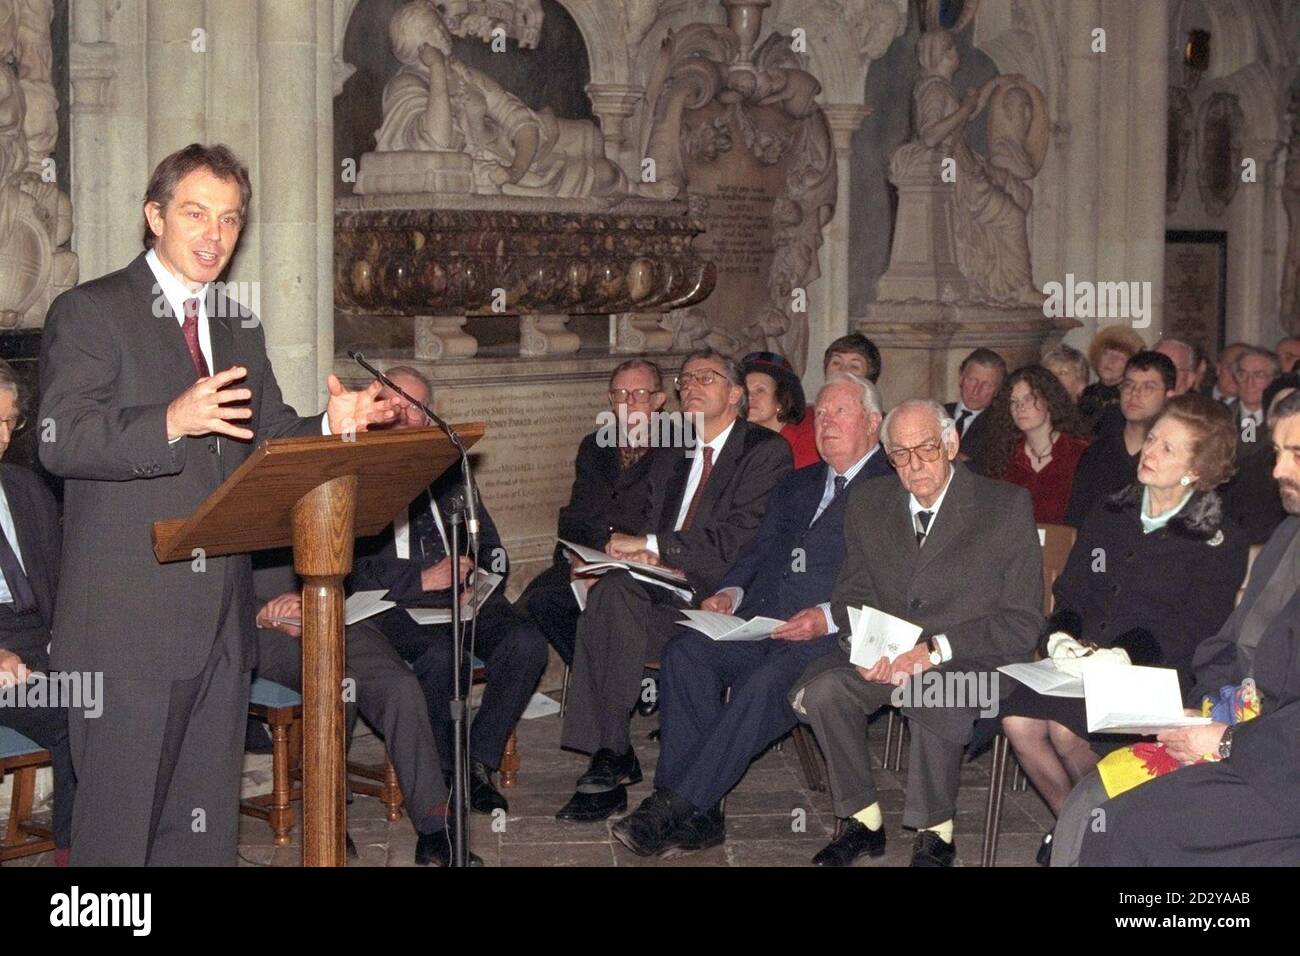 https://c8.alamy.com/comp/2D2YAAB/prime-minister-tony-blair-gives-a-reading-at-a-memorial-service-in-honour-of-stanley-baldwin-the-three-times-tory-prime-minister-at-westminster-abbey-tonight-thursday-also-attendingthe-service-were-former-prime-ministers-baroness-thatcher-with-husband-denis-and-sir-ted-heath-rota-photo-by-roy-letkeypa-2D2YAAB.jpg